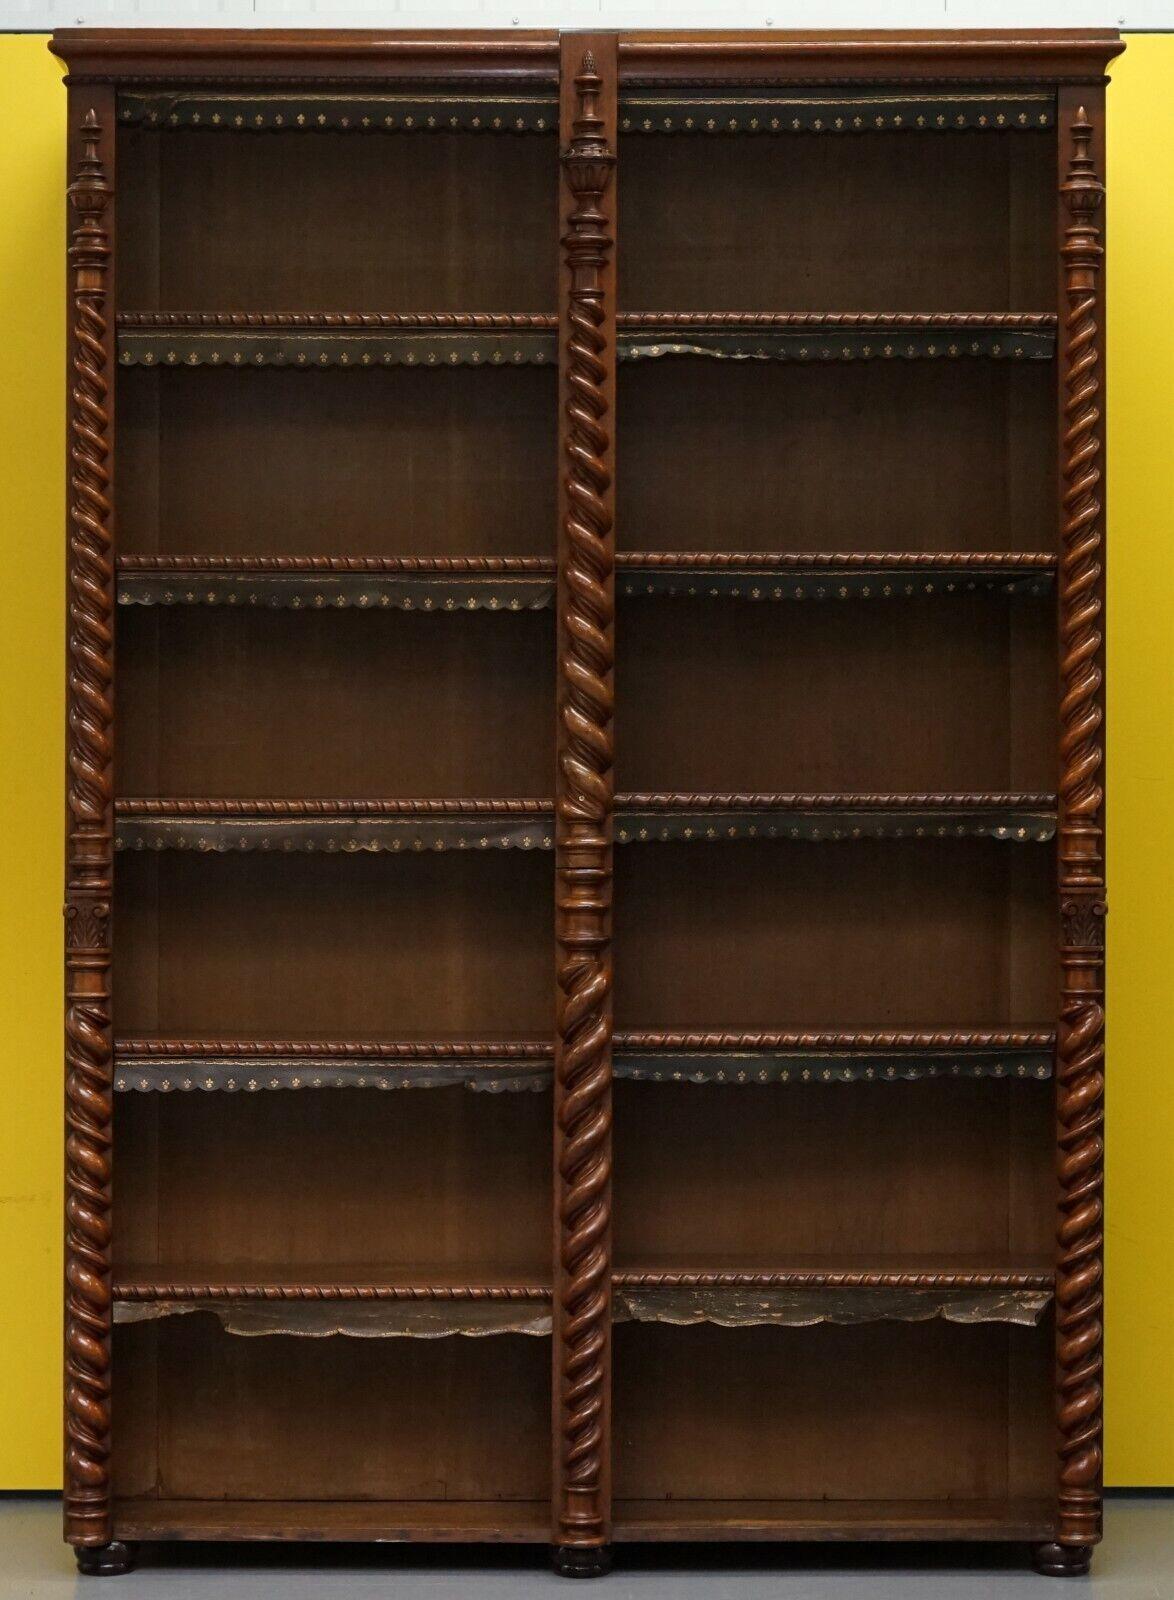 European Rare Regency Library Bookcase with Hidden Build in Coat Cupboards Leather Trim